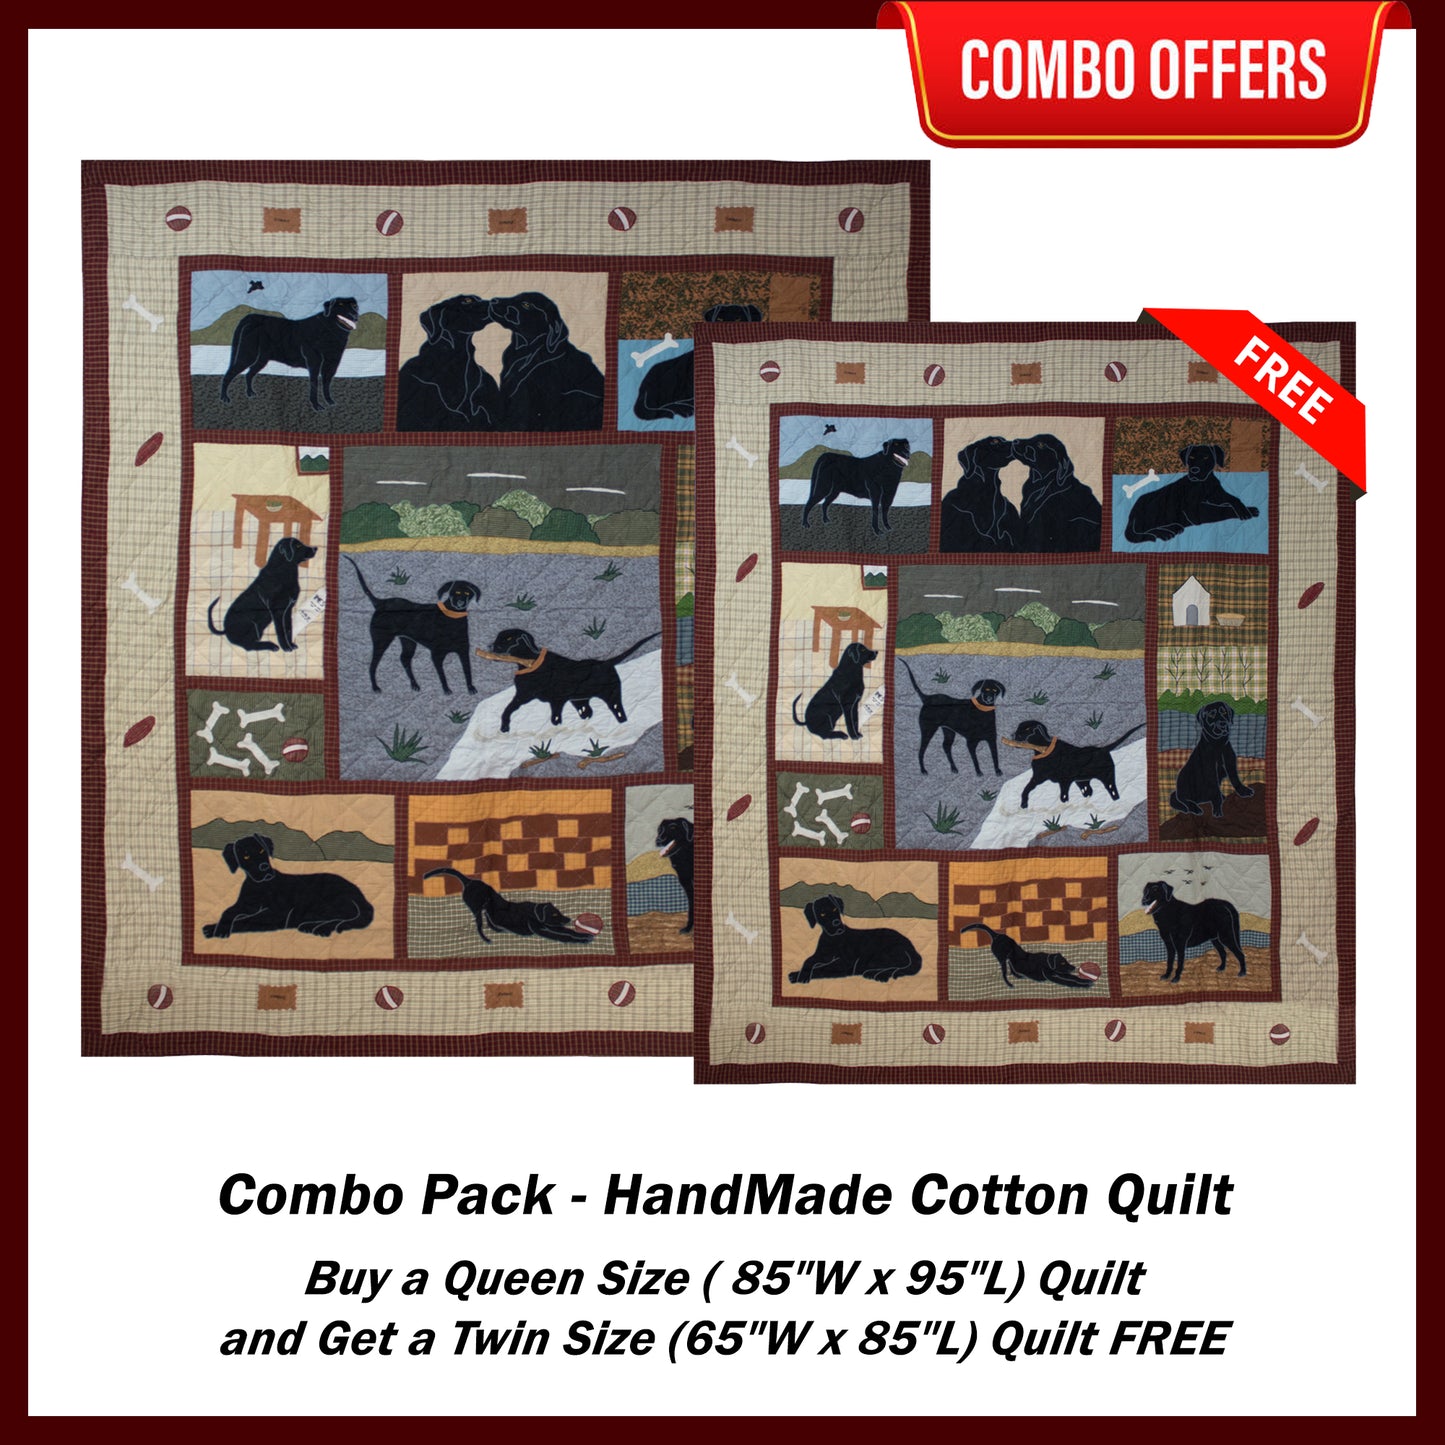 Black Lab Handmade Cotton Quilt - Buy a King Size (or) Queen Size Quilt and Get a Twin Size Quilt FREE